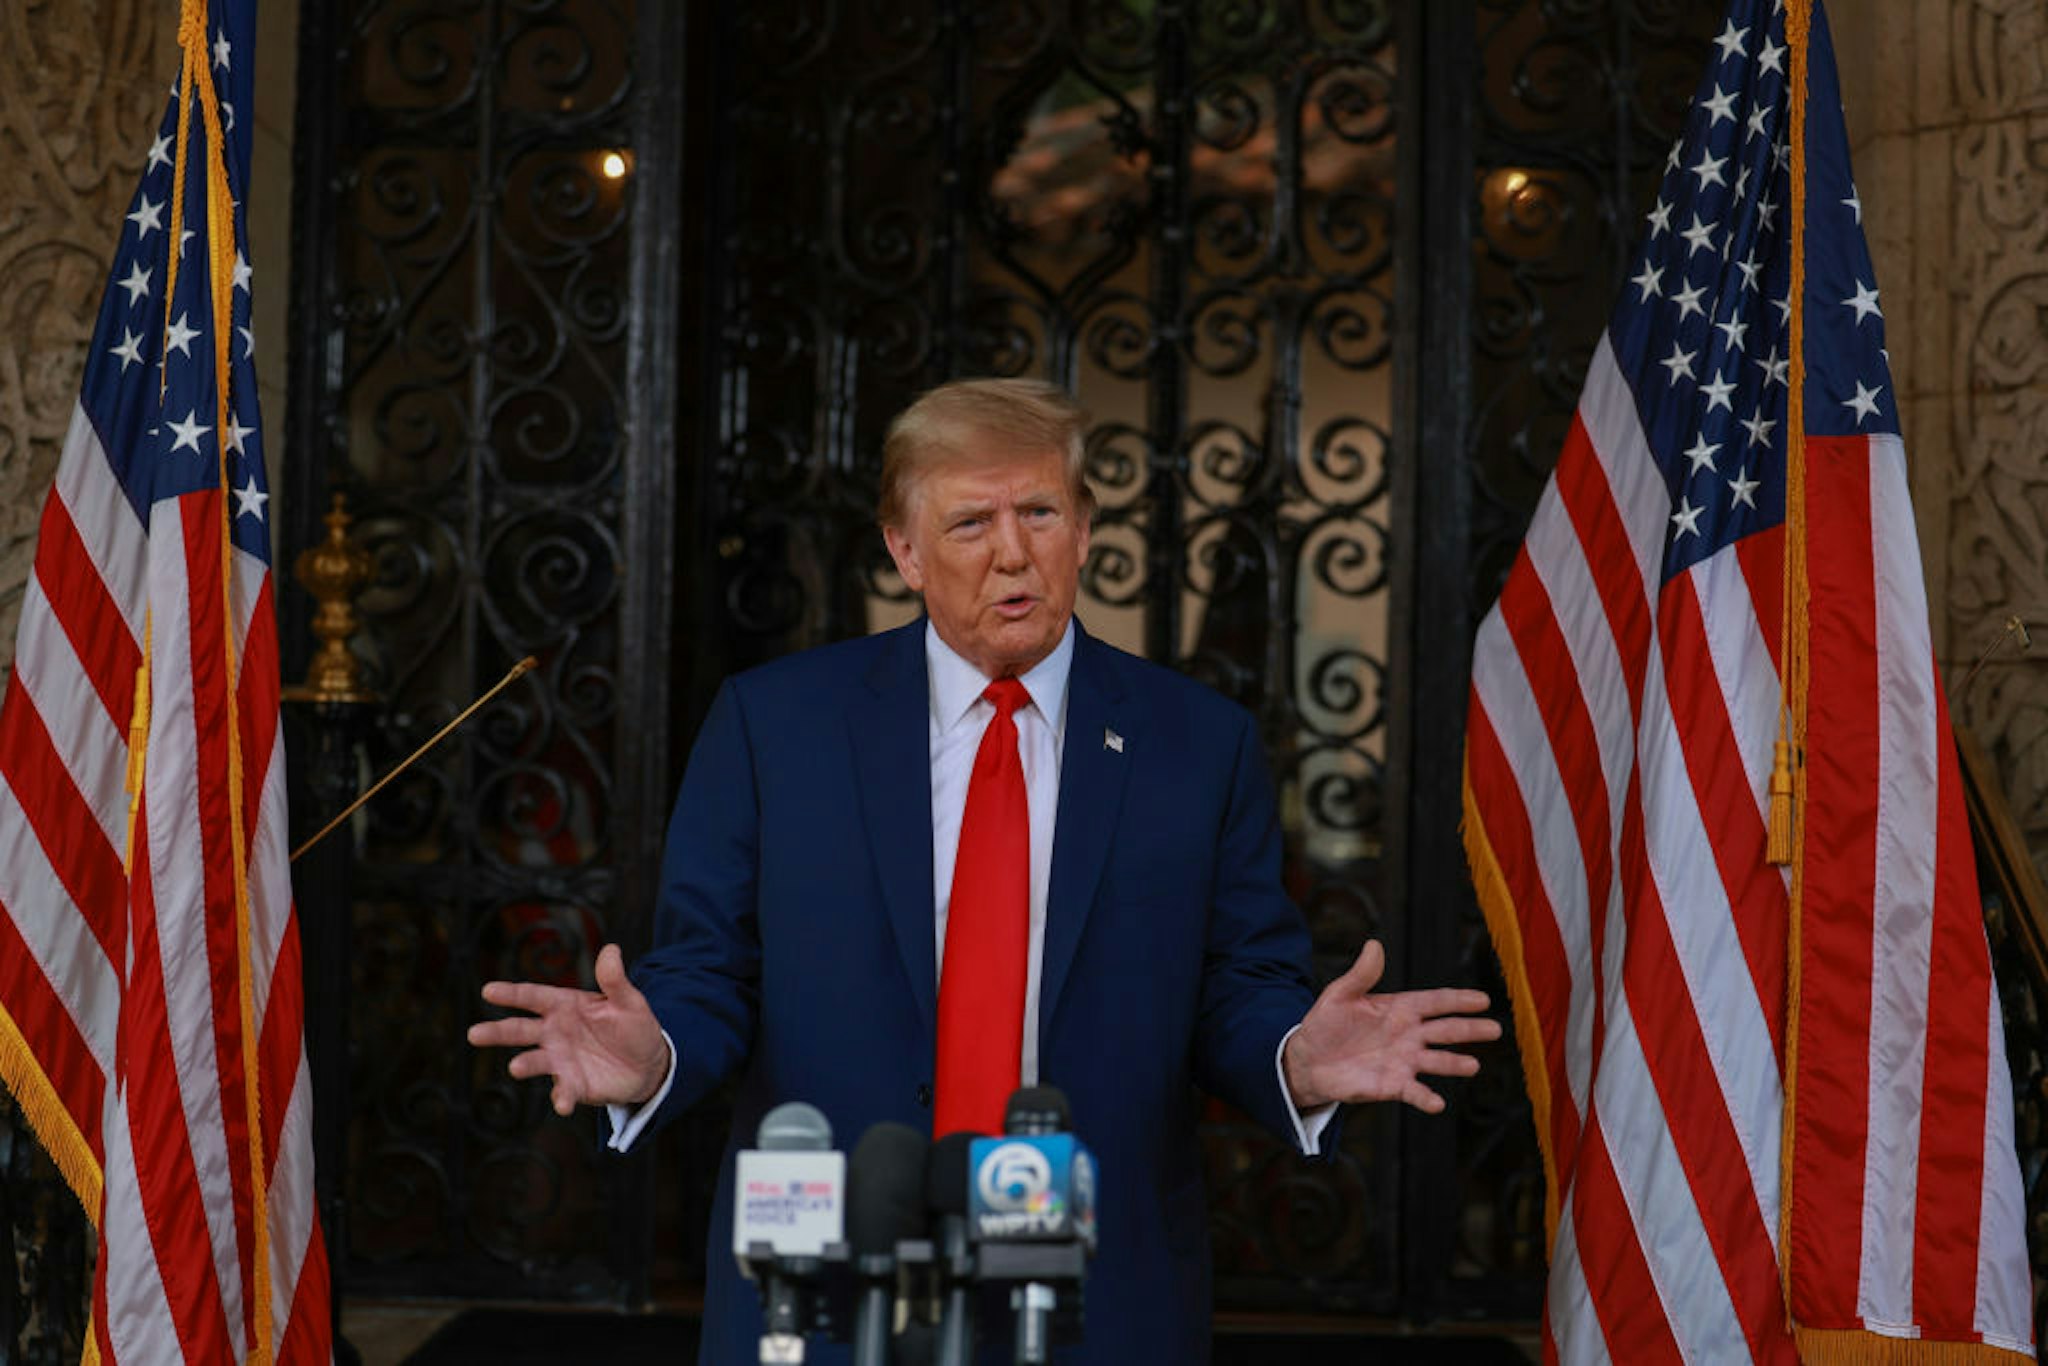 PALM BEACH, FLORIDA - FEBRUARY 08: Former U.S. President Donald Trump speaks during a press conference held at Mar-a-Lago on February 08, 2024 in Palm Beach, Florida. Mr. Trump spoke as the United States Supreme Court hears oral arguments over Trump’s ballot eligibility under the 14th Amendment.